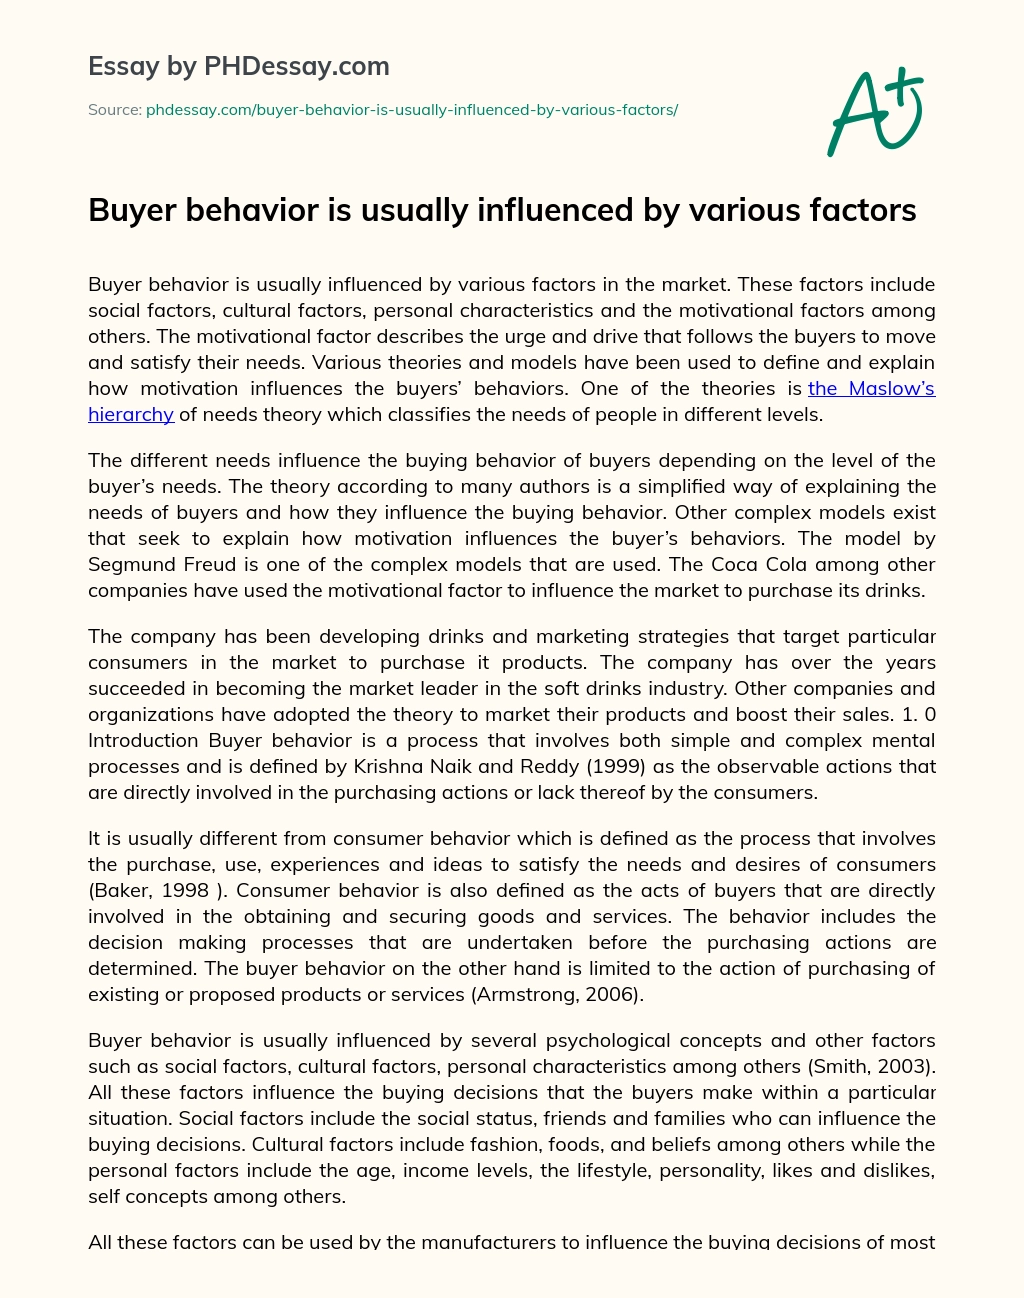 Buyer behavior is usually influenced by various factors essay